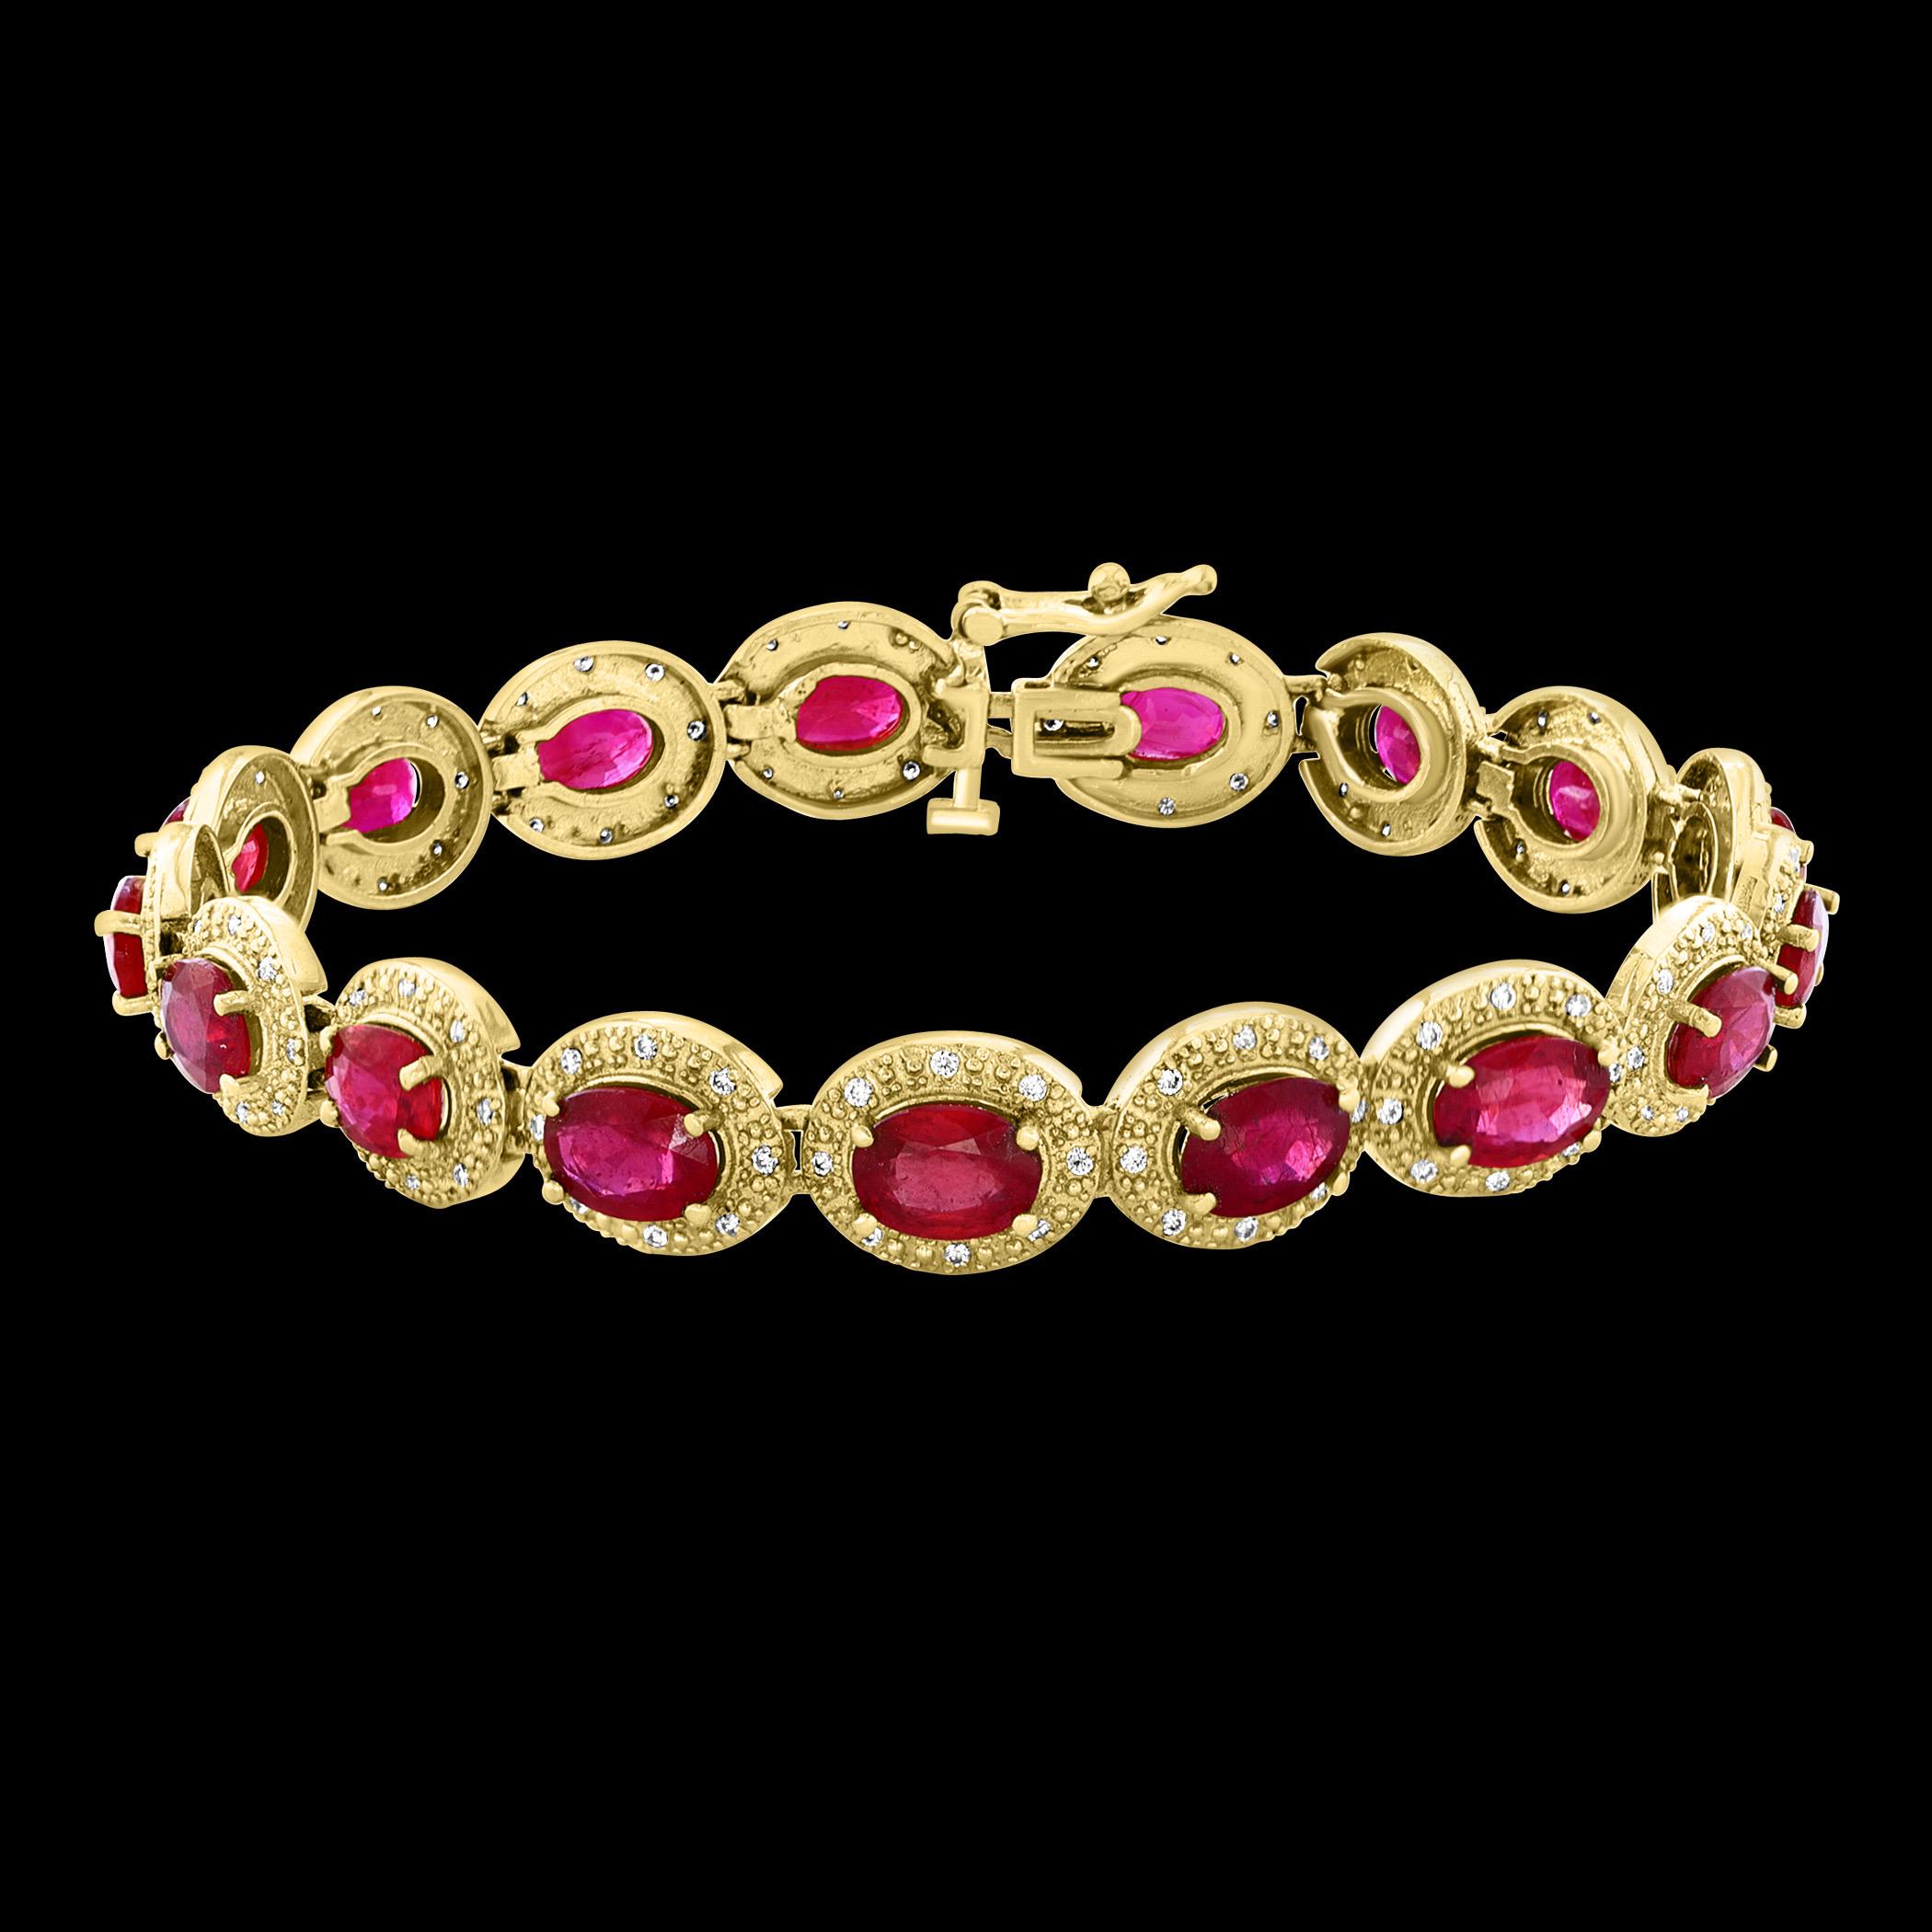 Introducing our stunning and affordable 14 Karat Yellow Gold Tennis Bracelet featuring a remarkable 17 carat oval treated Ruby and 1 carat of diamonds. This bracelet is a true statement piece, showcasing the beauty and elegance of rubies and